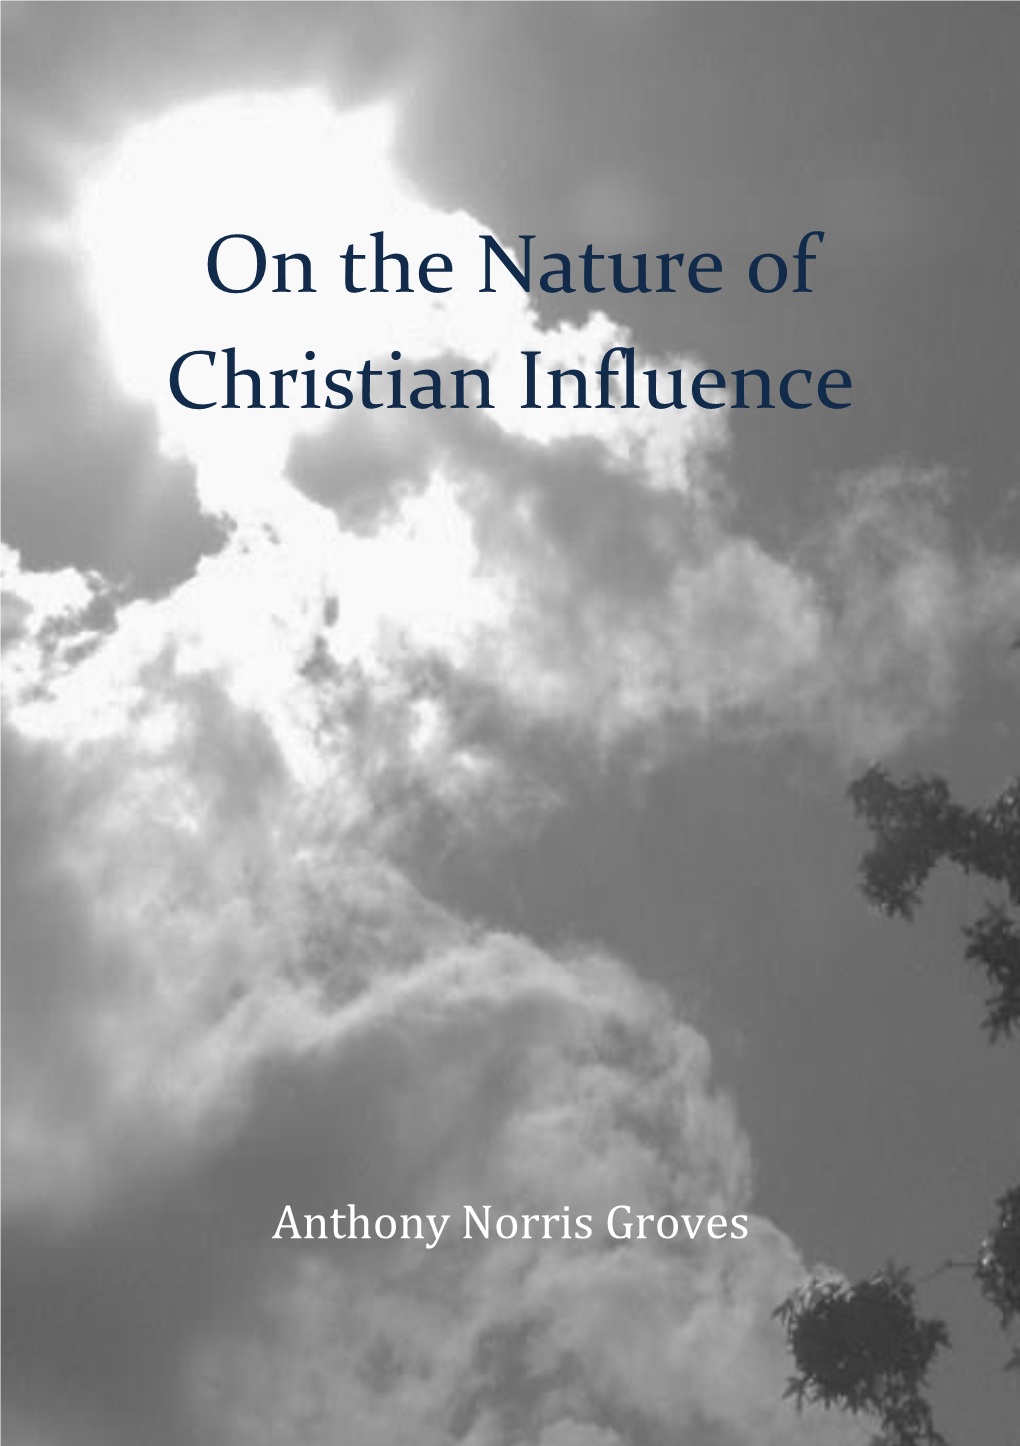 On the Nature of Christian Influence